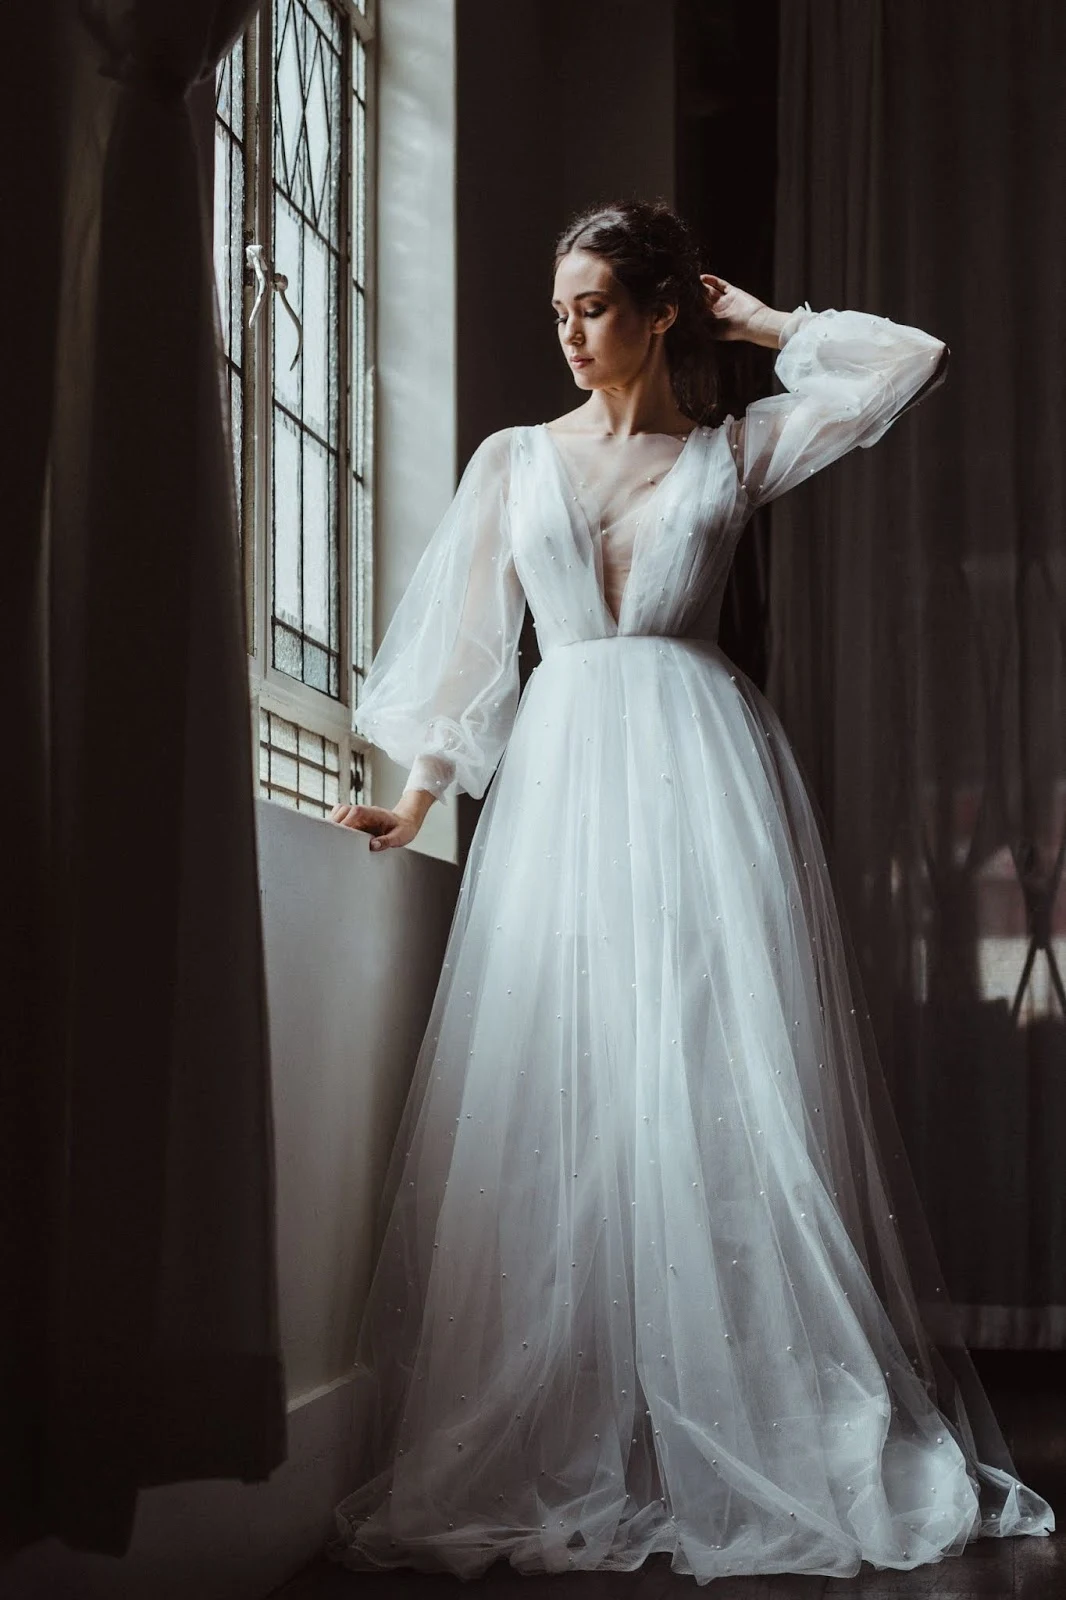 romantic bridal gowns australian designer images by jaz anderson photography